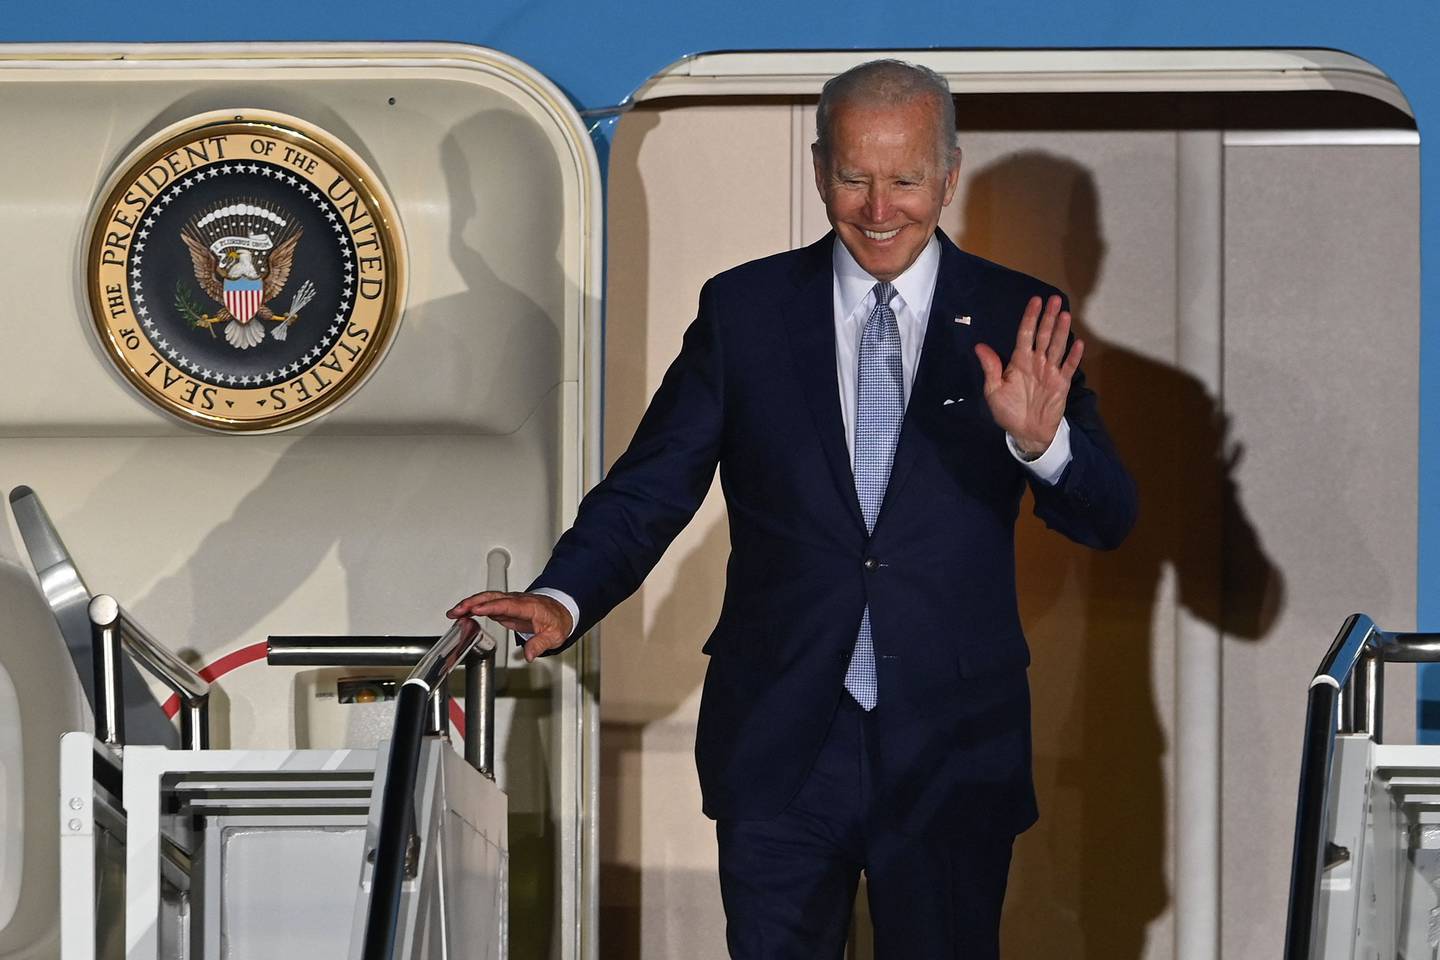 US President Joe Biden waves as he disembarks from Air Force One upon his arrival in Munich on the eve of the G7 summit. AFP